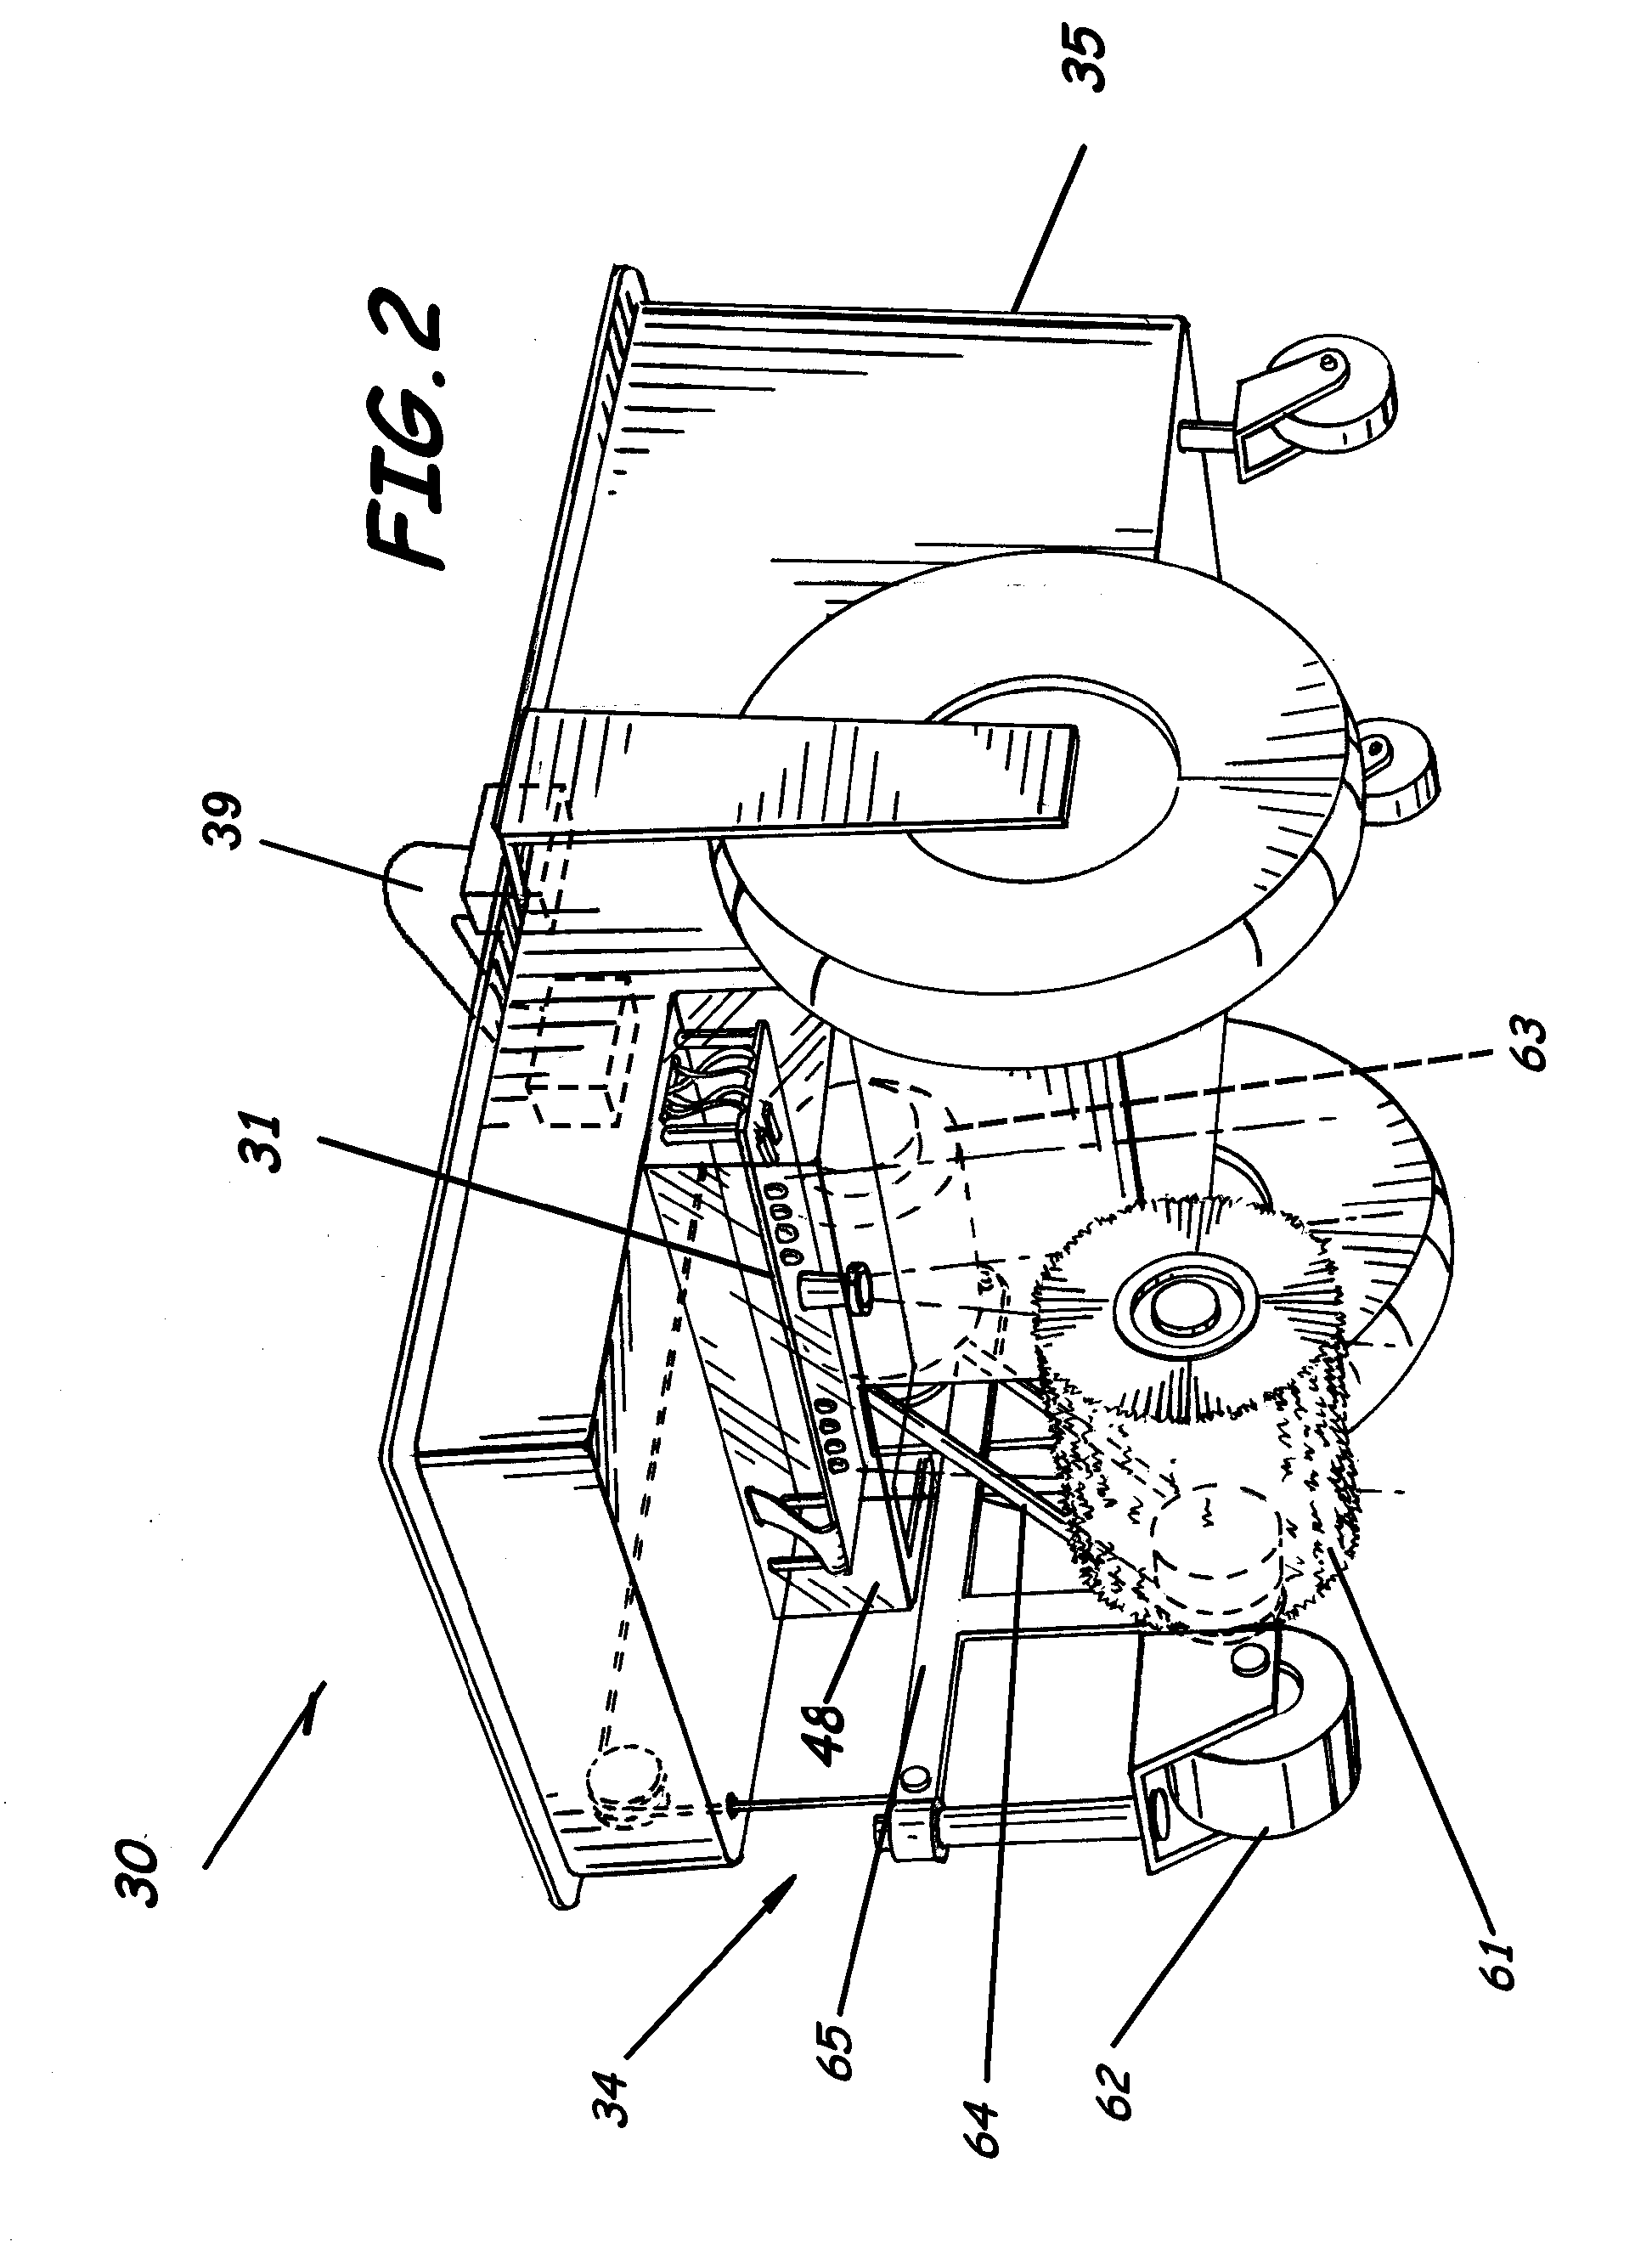 Apparatus for cleaning lines on a playing surface and associated methods, handle enhancements